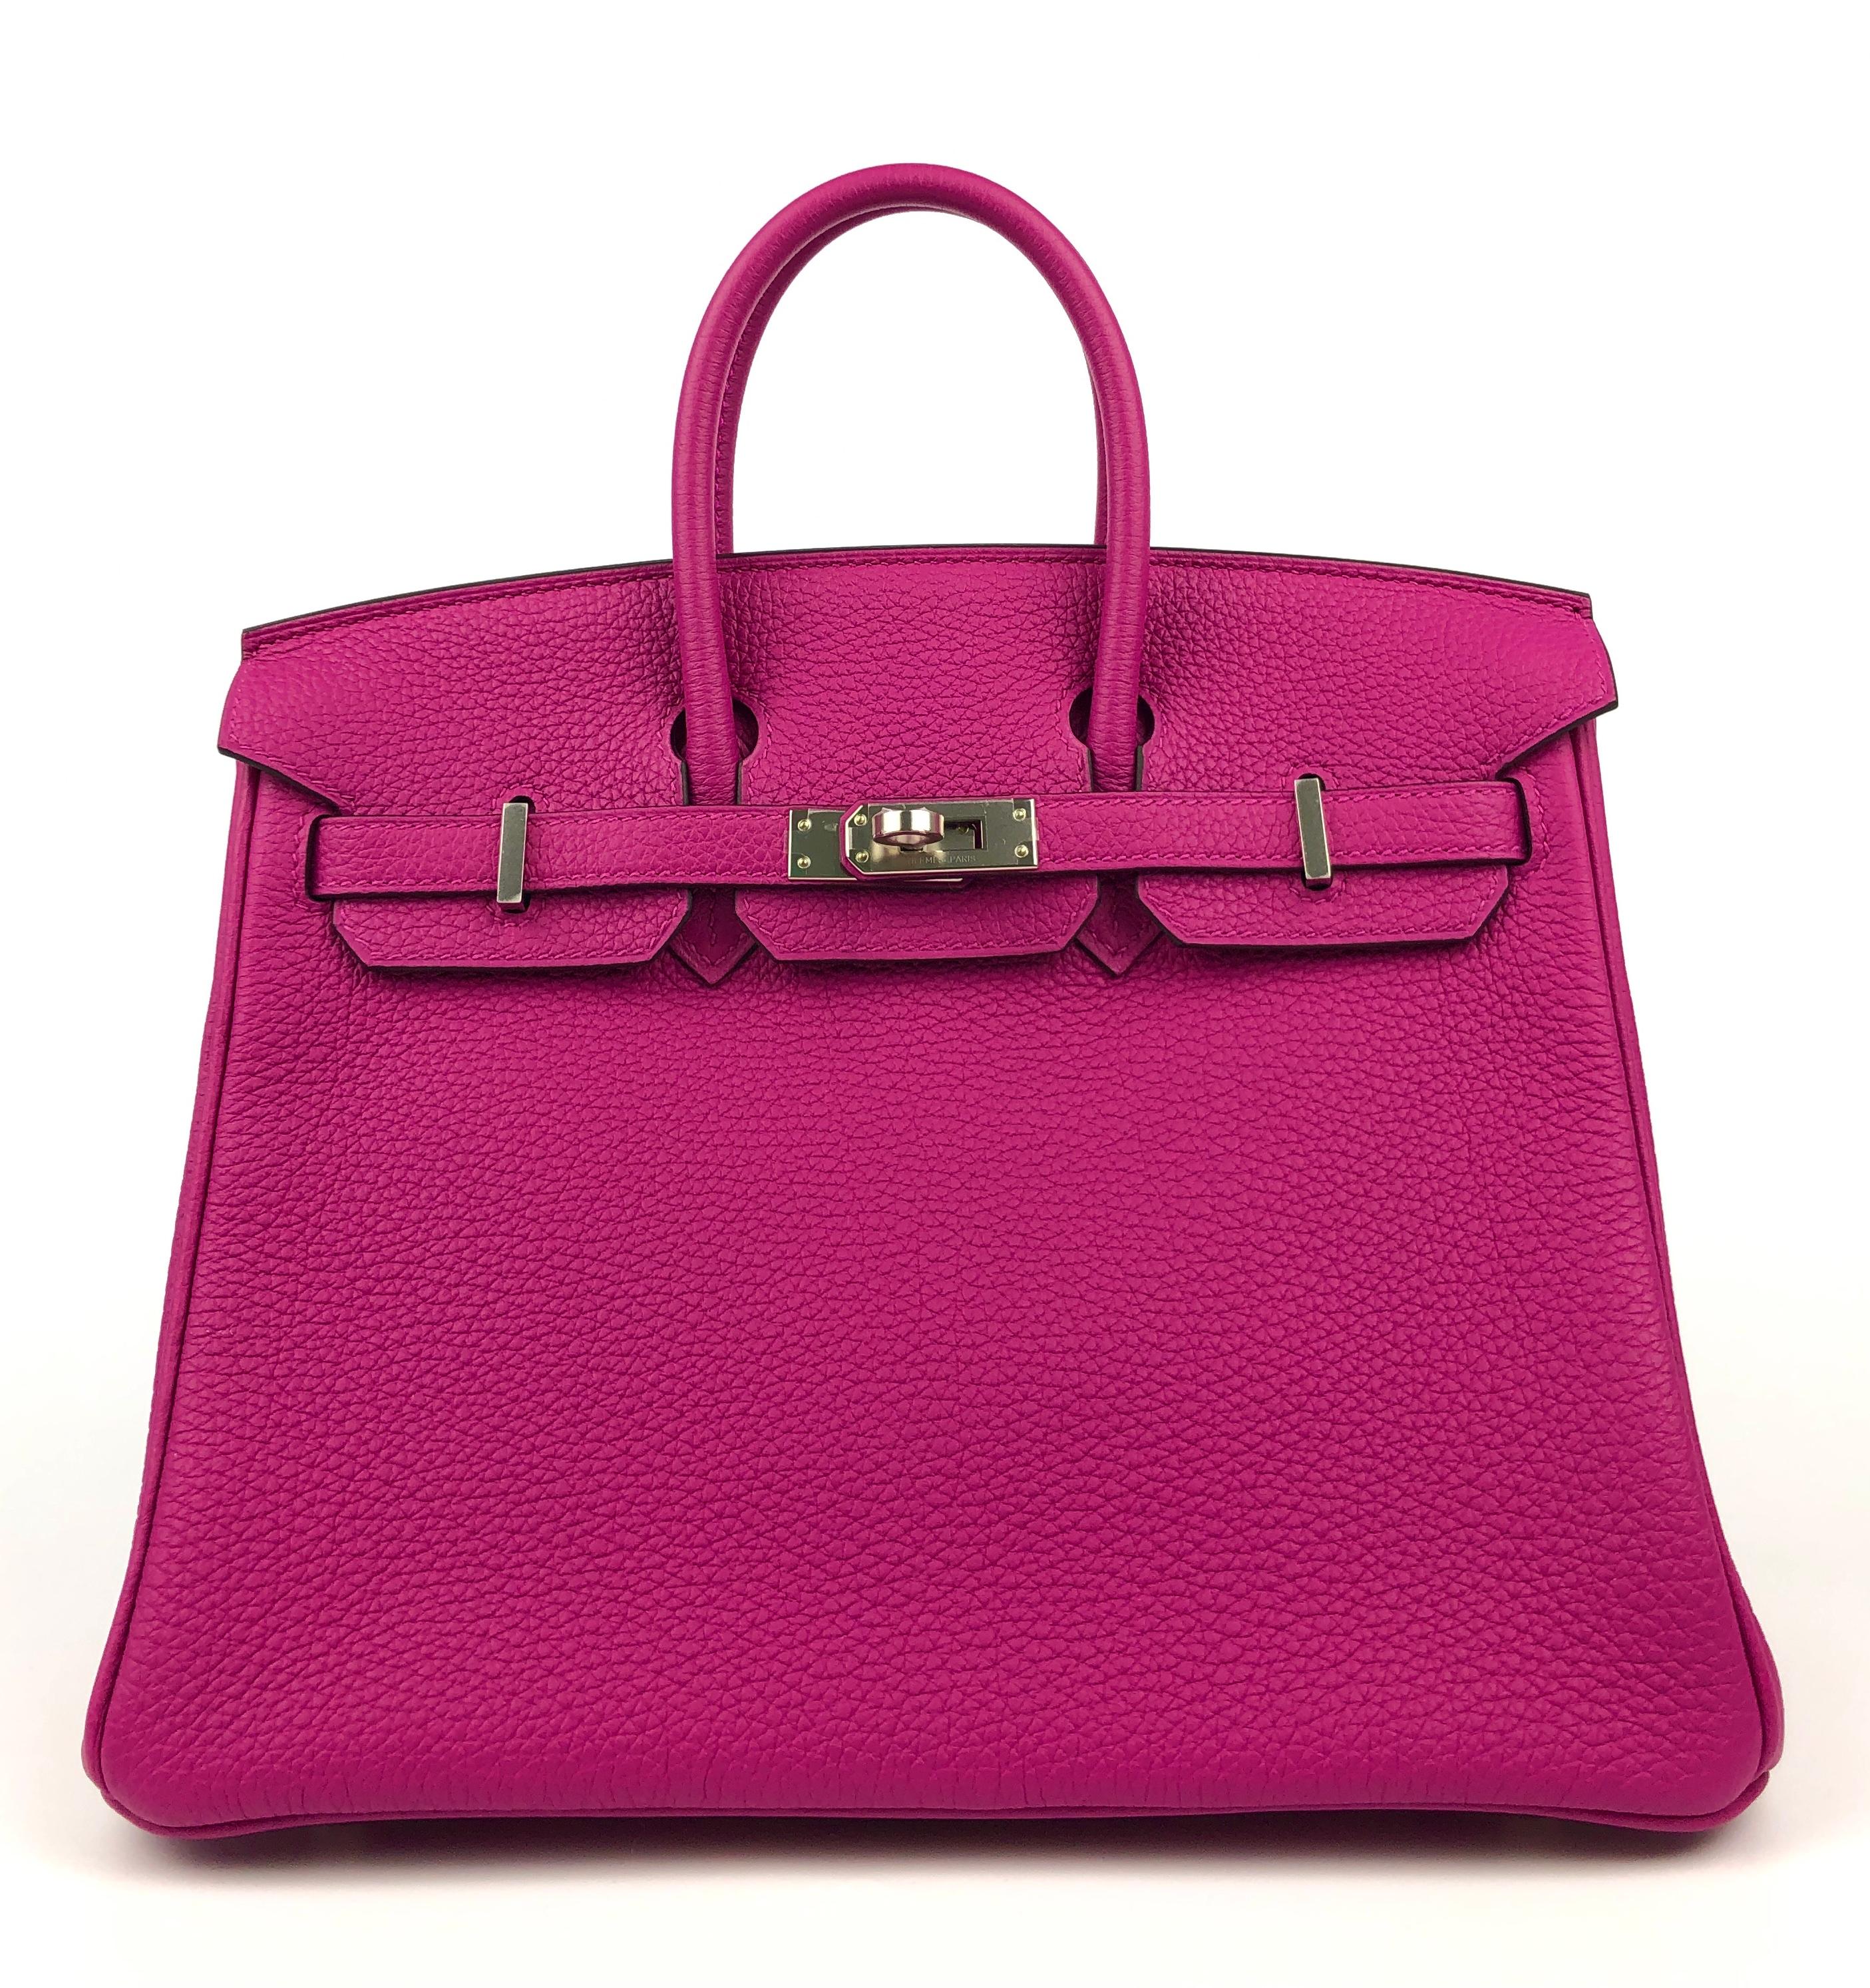 NEW Hermes Birkin 25 Rose Pourpre Pink Purple Togo Palladium Hardware. Y Stamp 2020

Shop with Confidence from Lux Addicts. Authenticity Guaranteed!